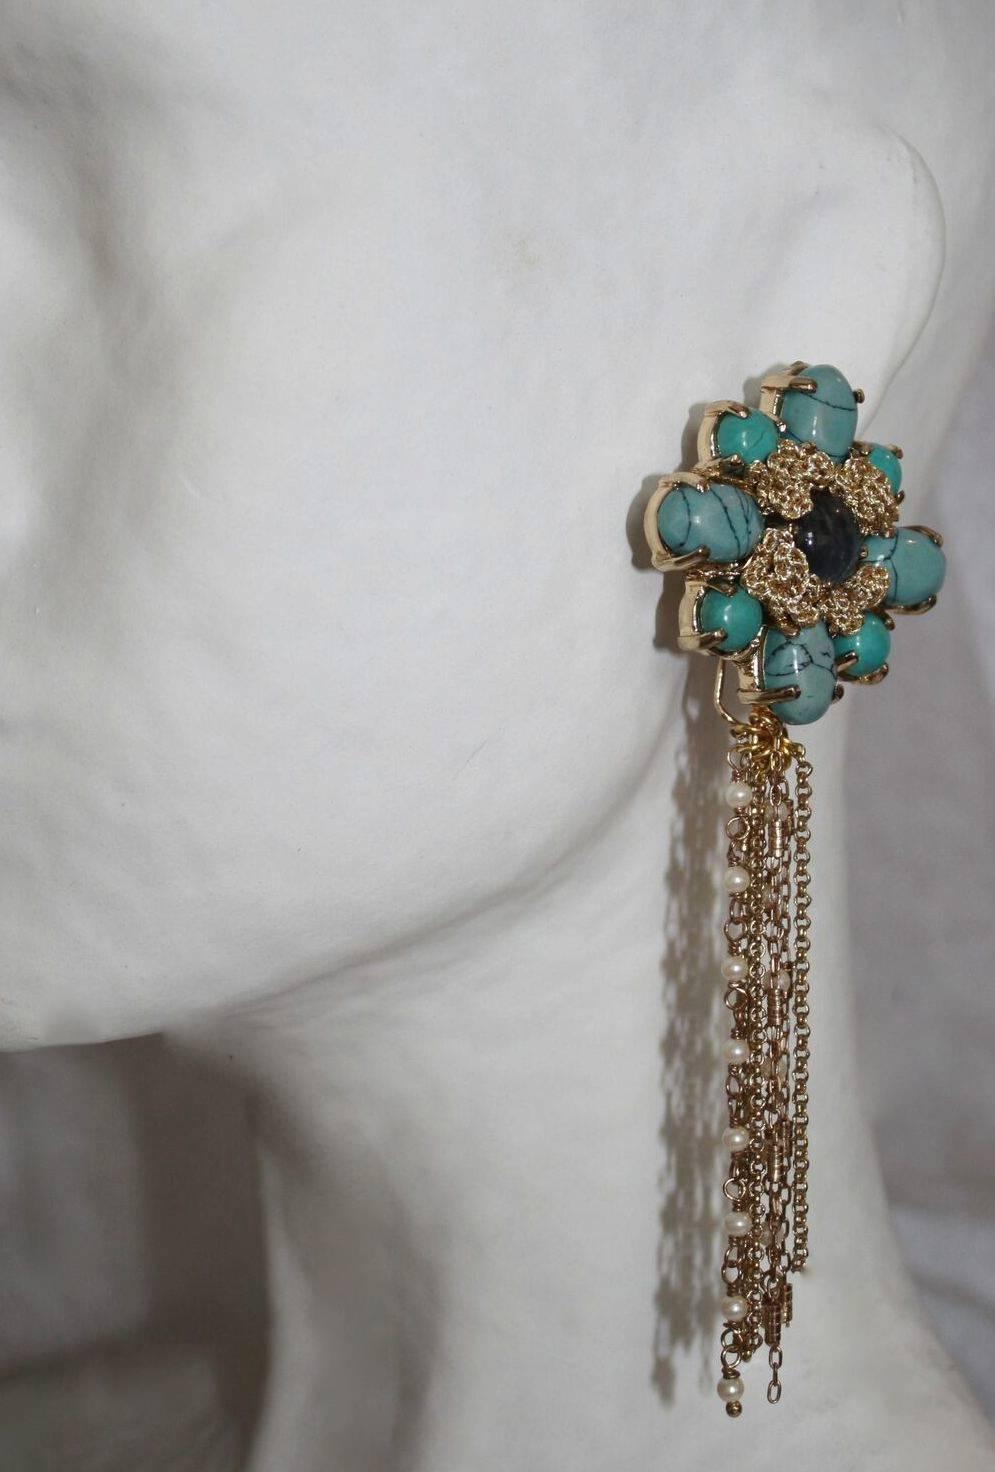 St Erasmus flower shape clip earrings with howlite, labradorite, and multi chain fringe.

Designer biography:

In 1995 after finishing a degree in fine arts and painting, Pieter Louis Erasmus moved to London. In 1996, he started working at